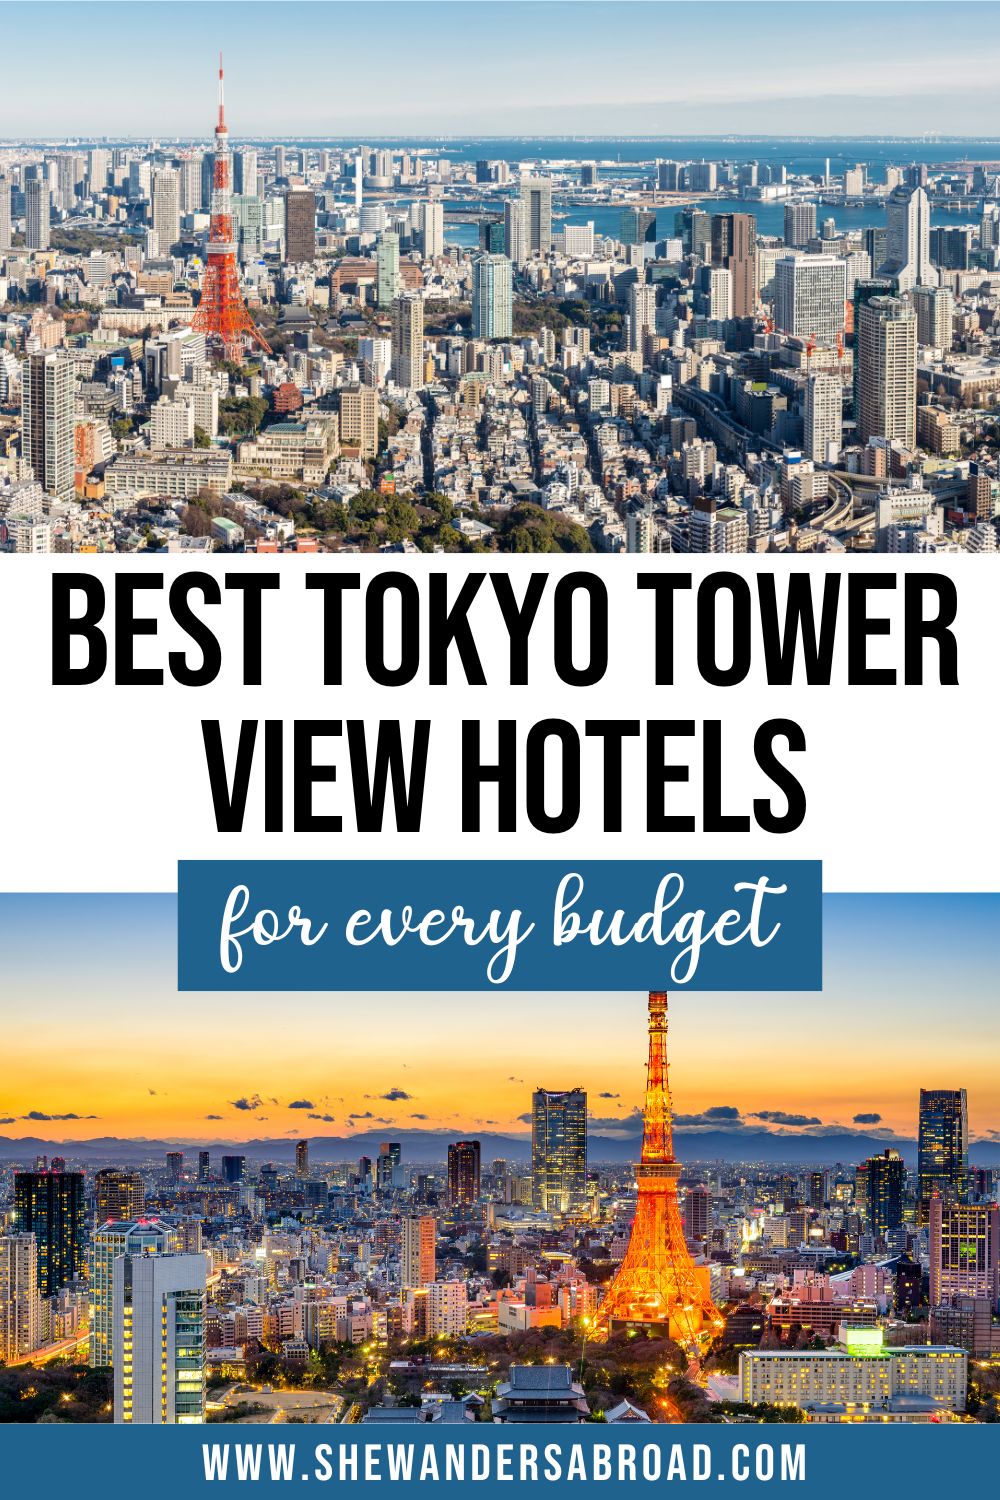 Best Hotels with Tokyo Tower Views You Can't Miss